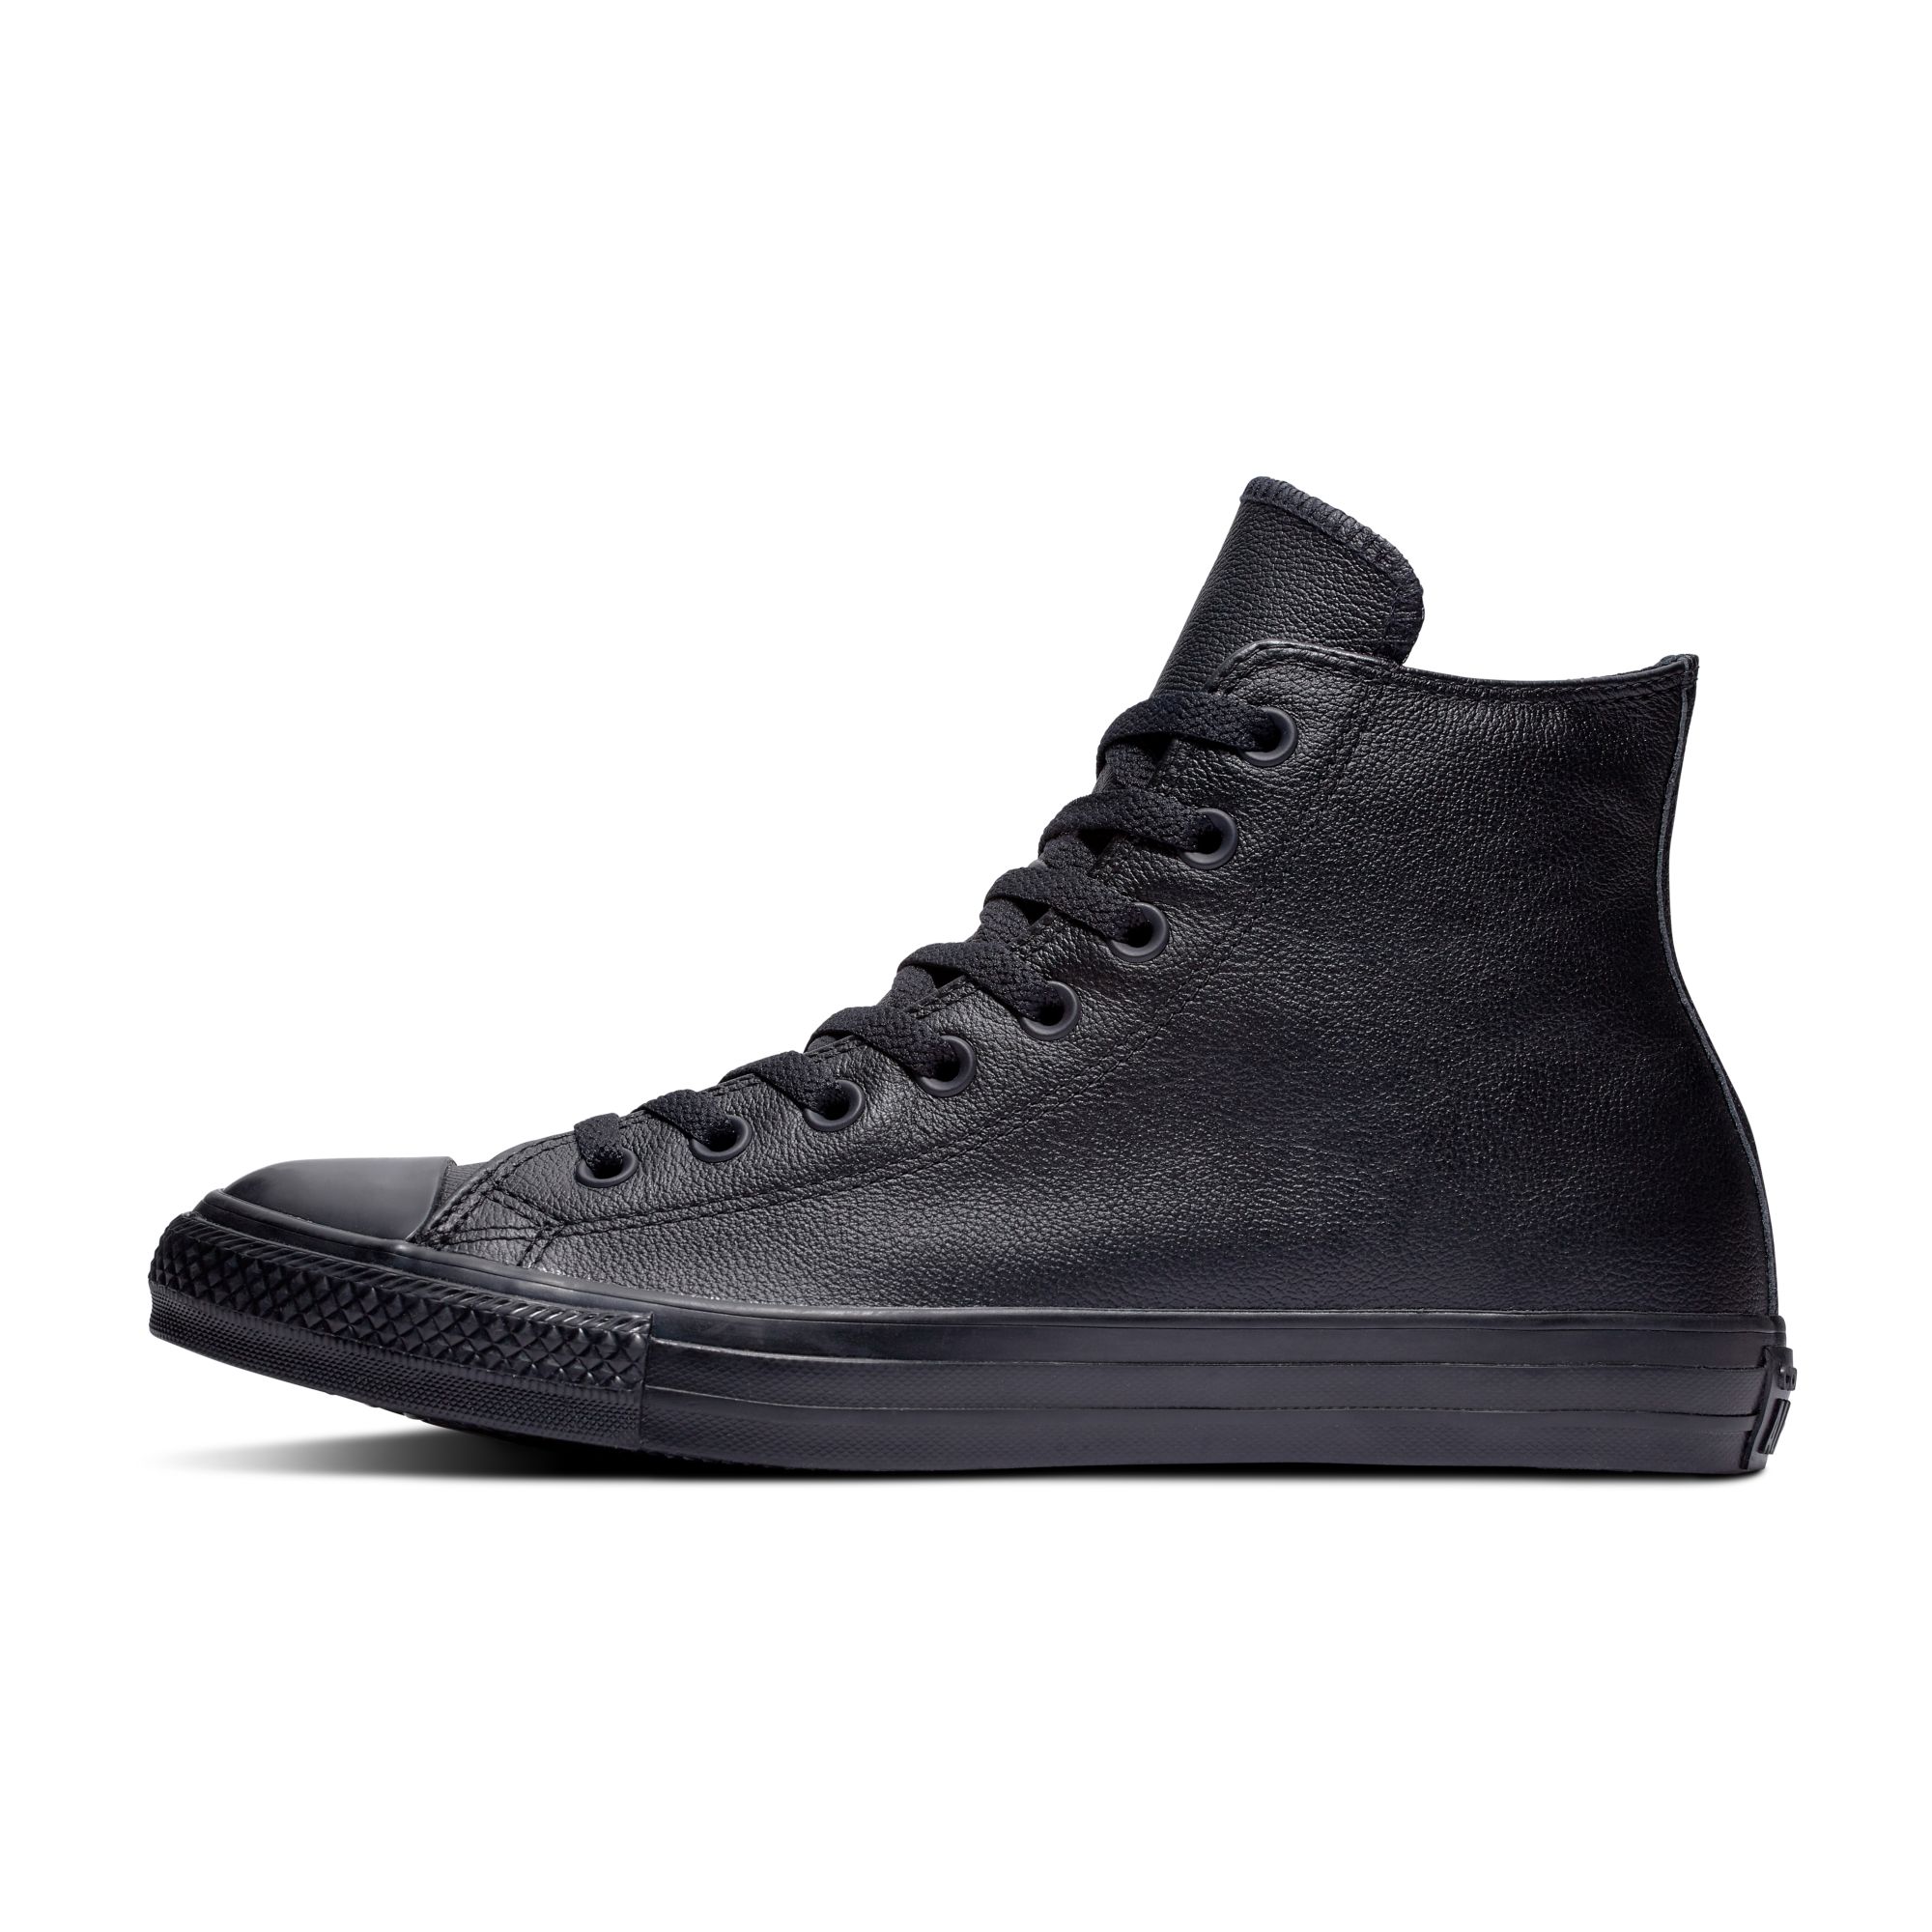 converse all star high leather mono